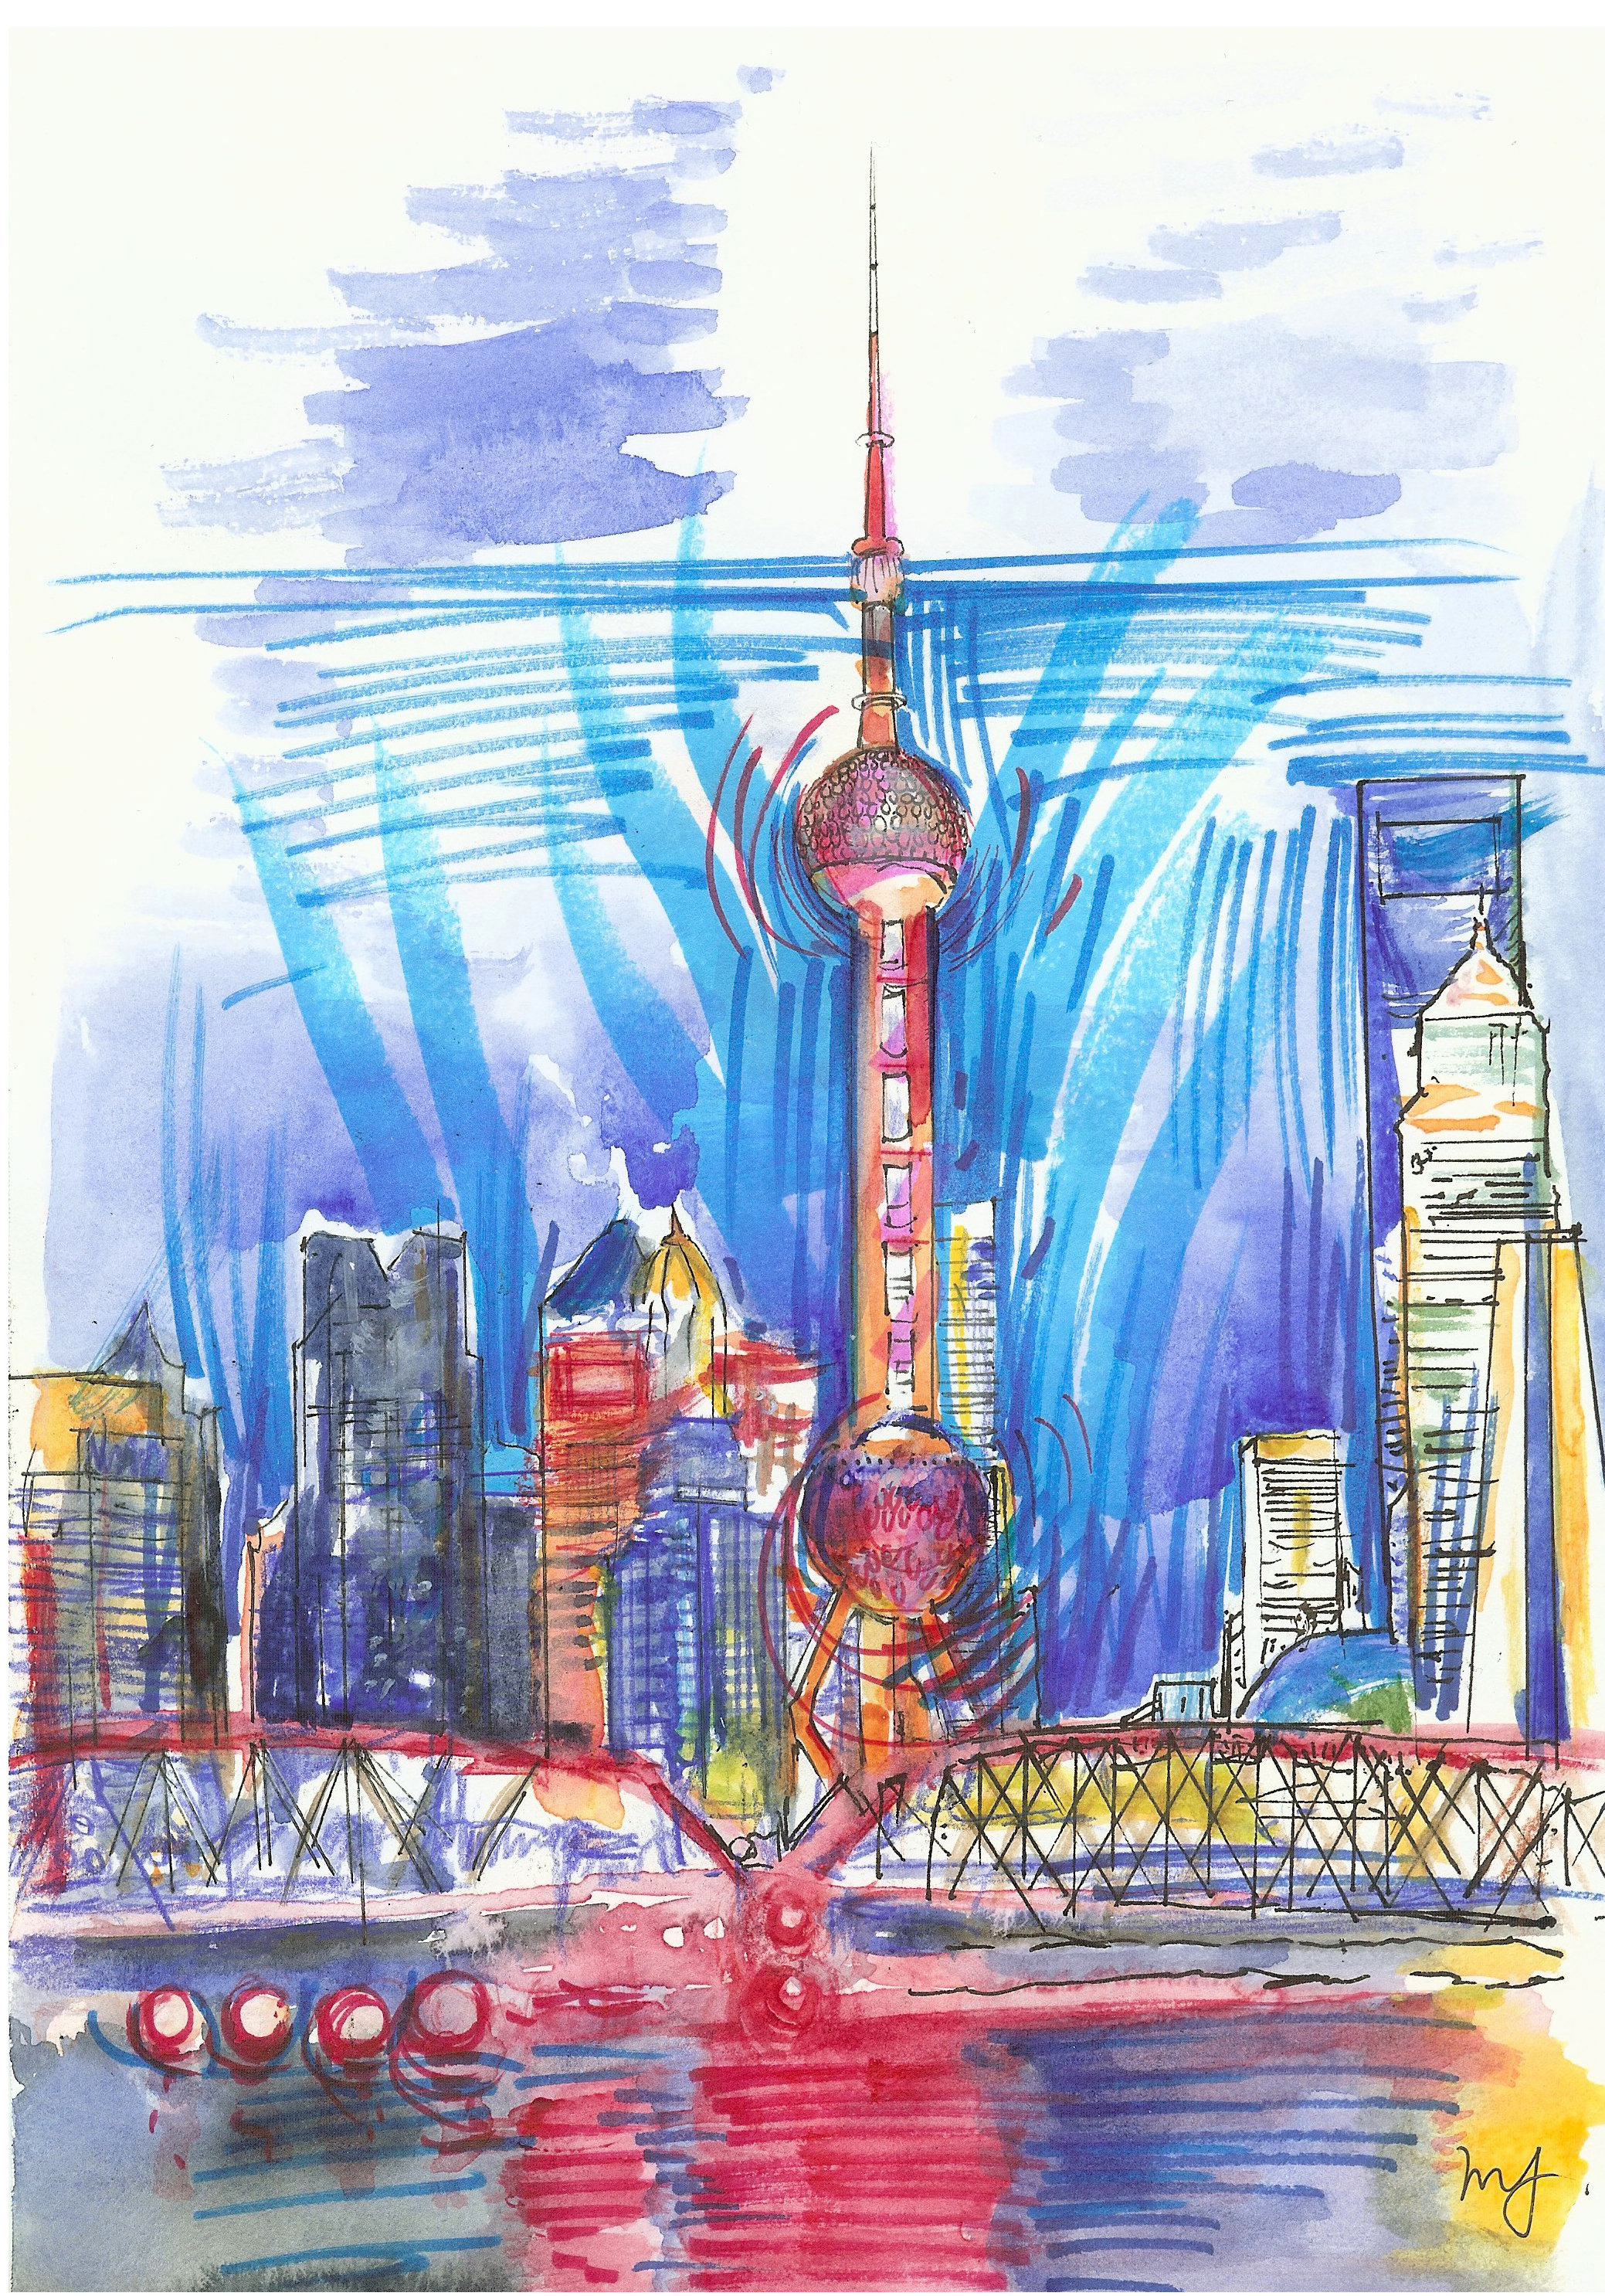 MEGATALL STRUCTURES: THE SHANGHAI TOWER